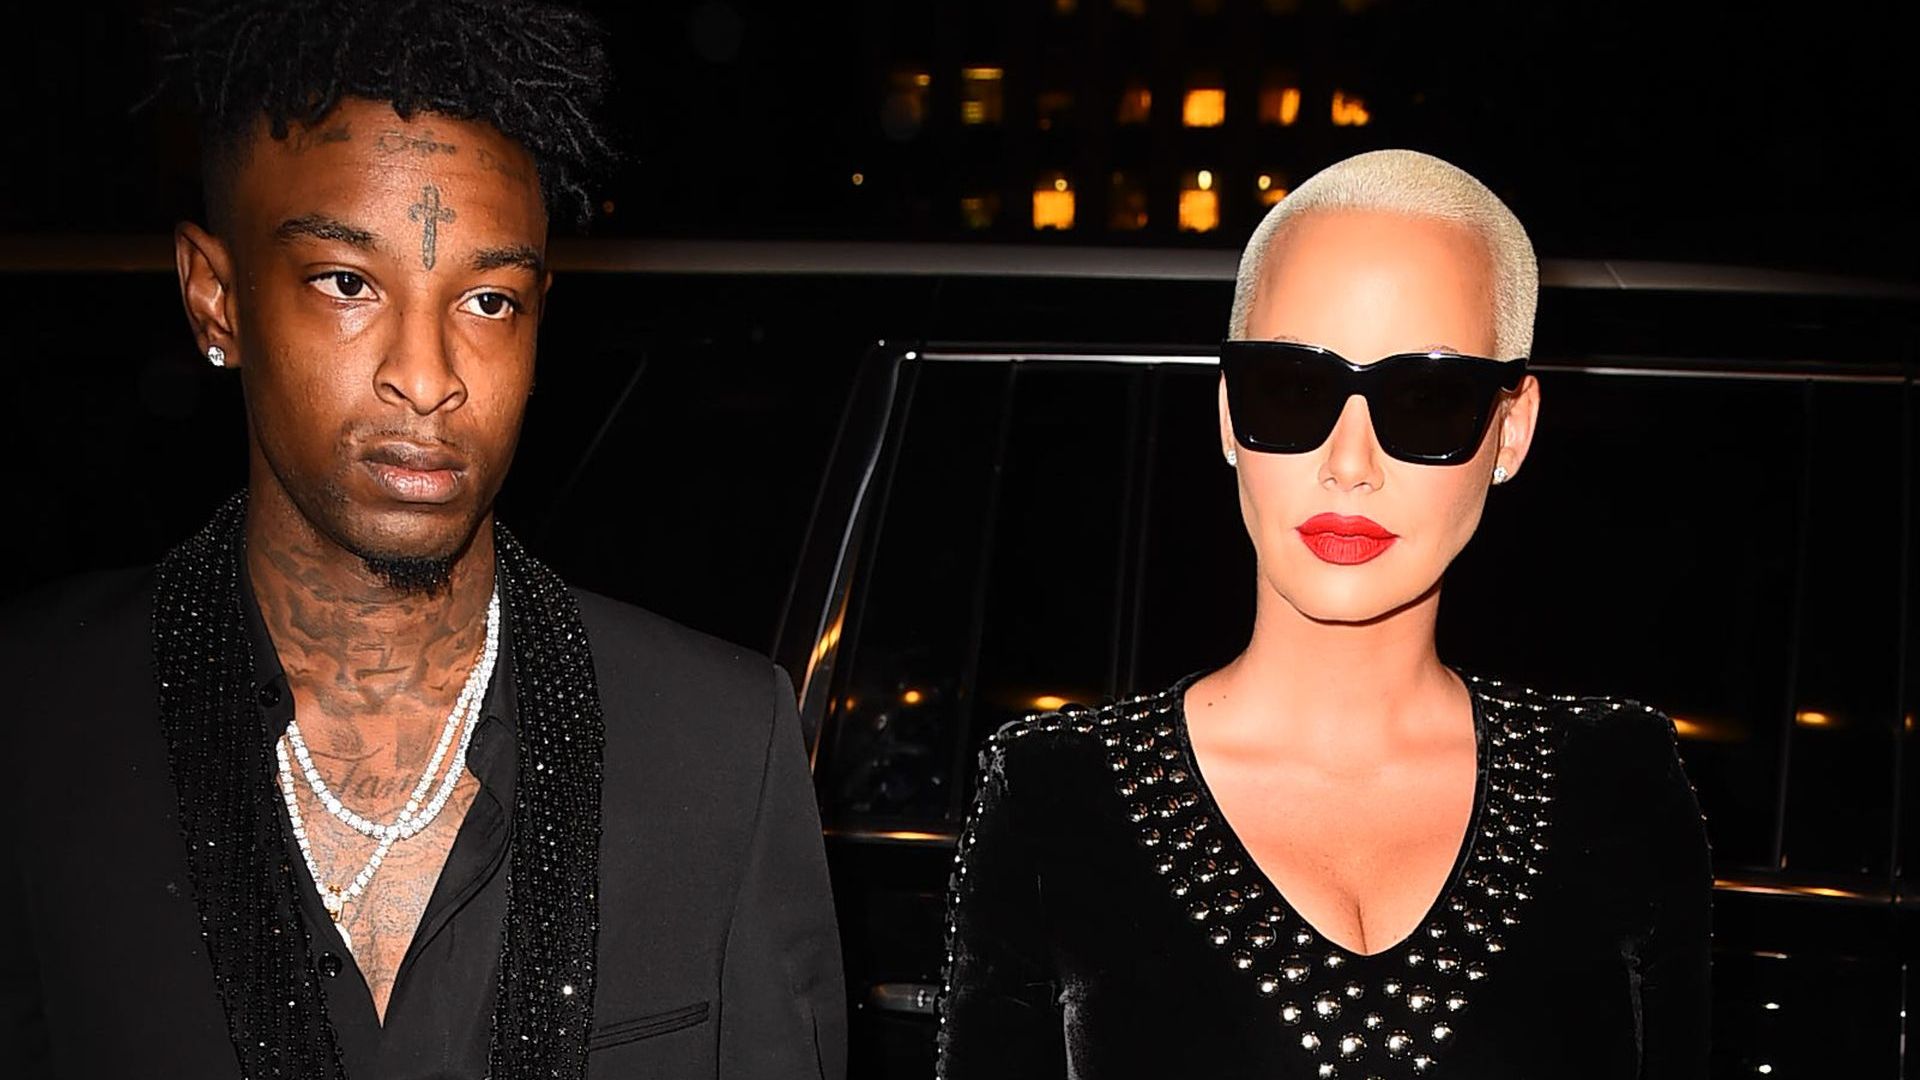 bahram amoui recommends amber rose snapchat video pic